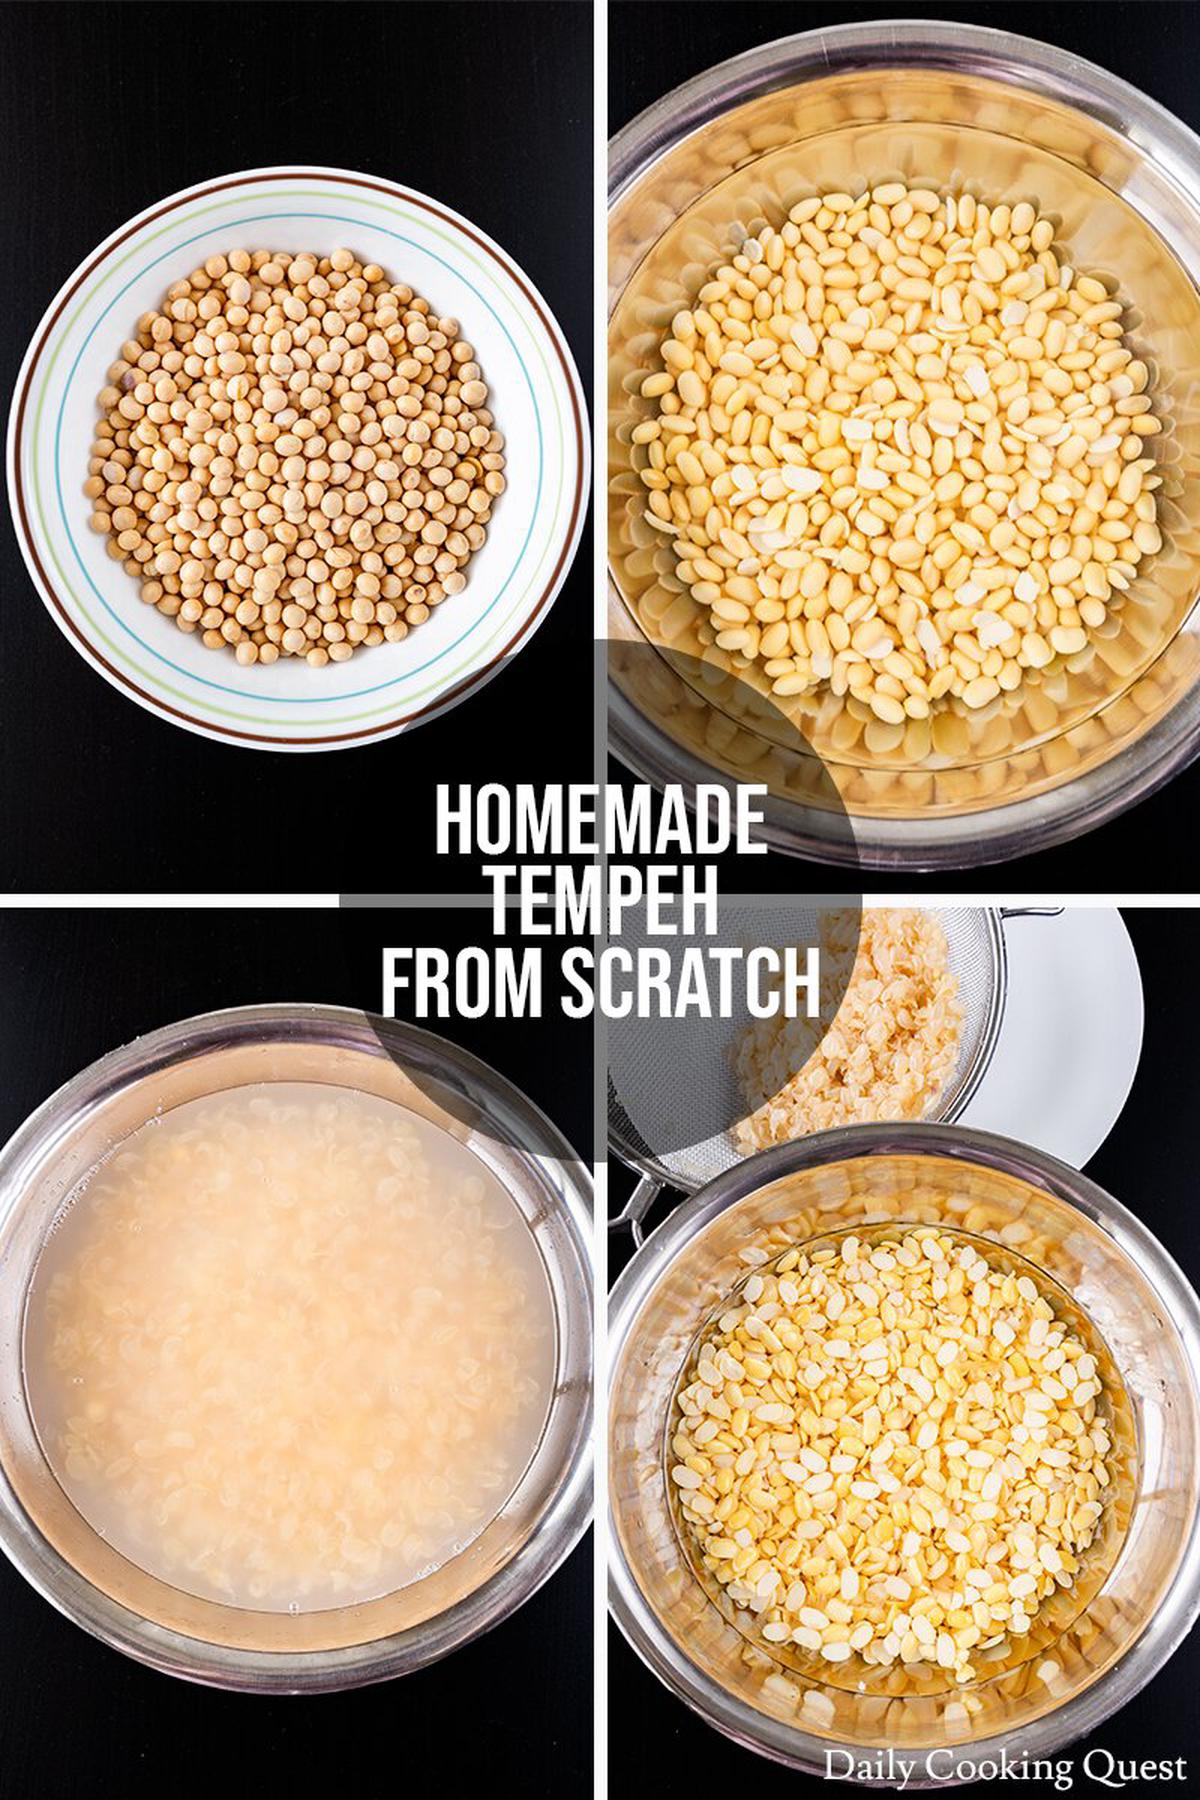 Homemade tempeh guide: (1) Measure dry soybeans. (2) Soak soybeans in cold water for 12 hours. (3) & (4) Dehull the soybeans.